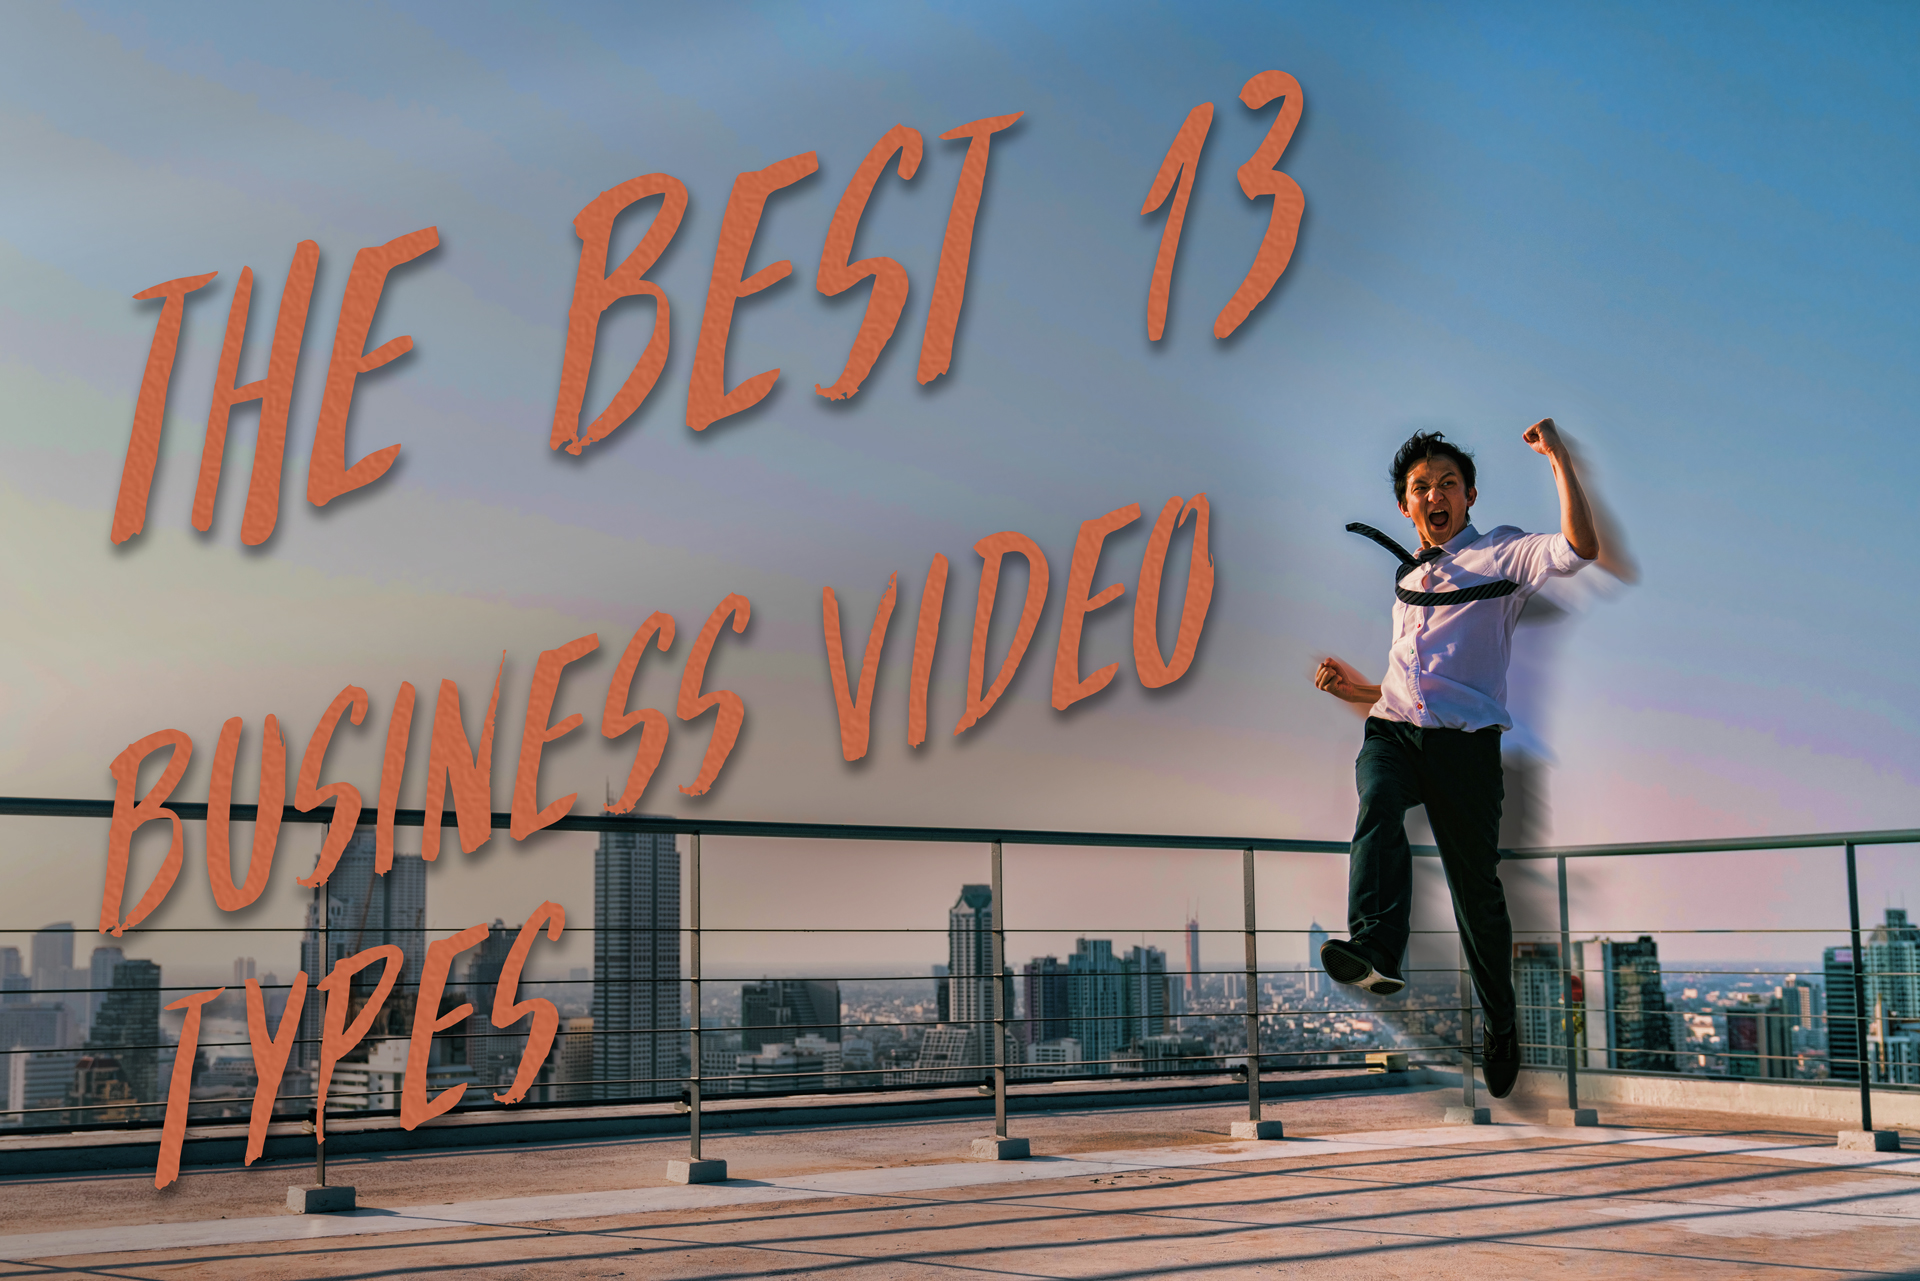 13 BUSINESS VIDEO TYPES That will drive prospects away from your competition.